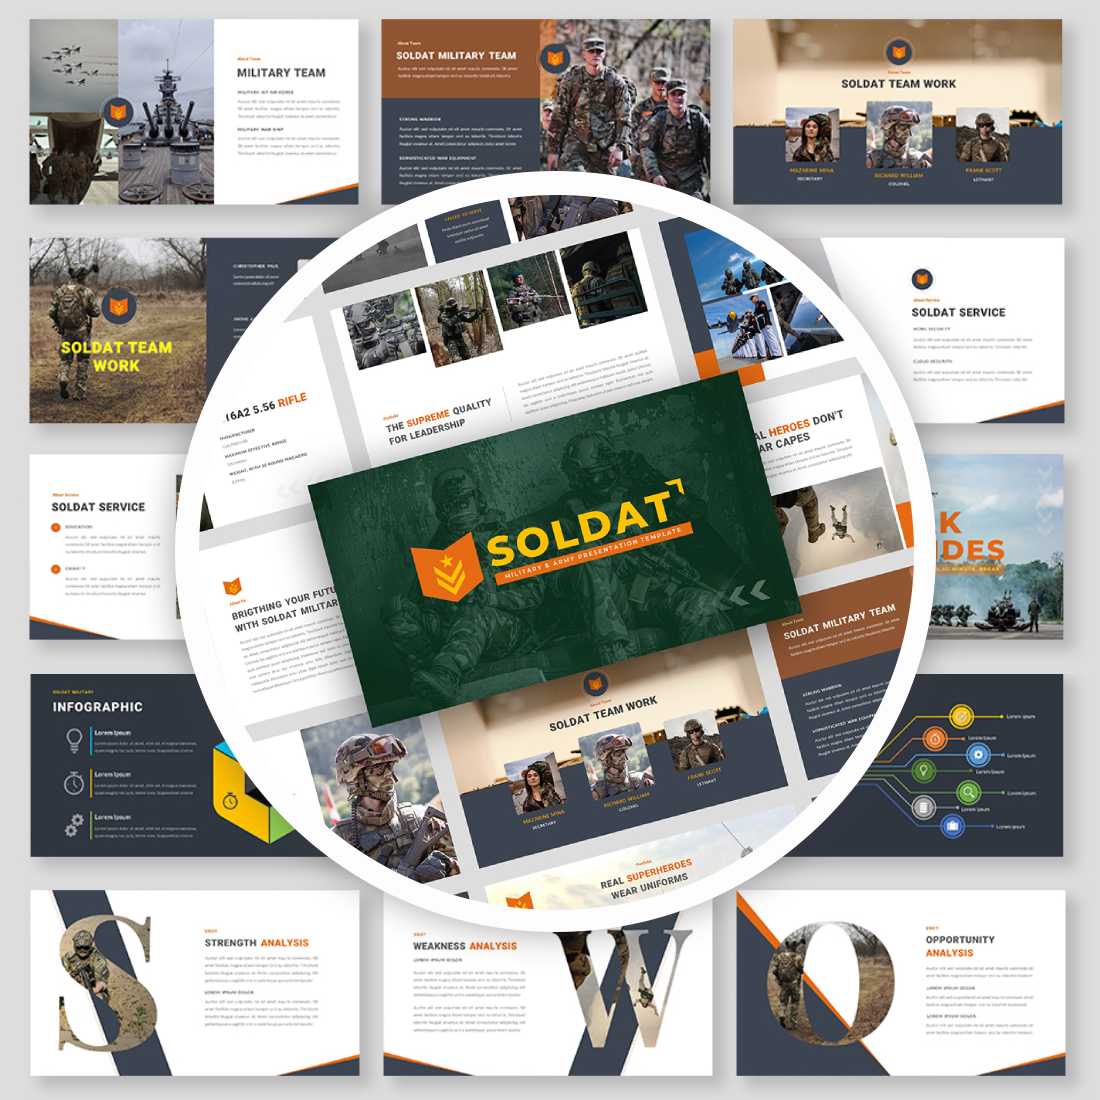 SOLDAT - Military and Army Presentation Google Slides Template cover image.